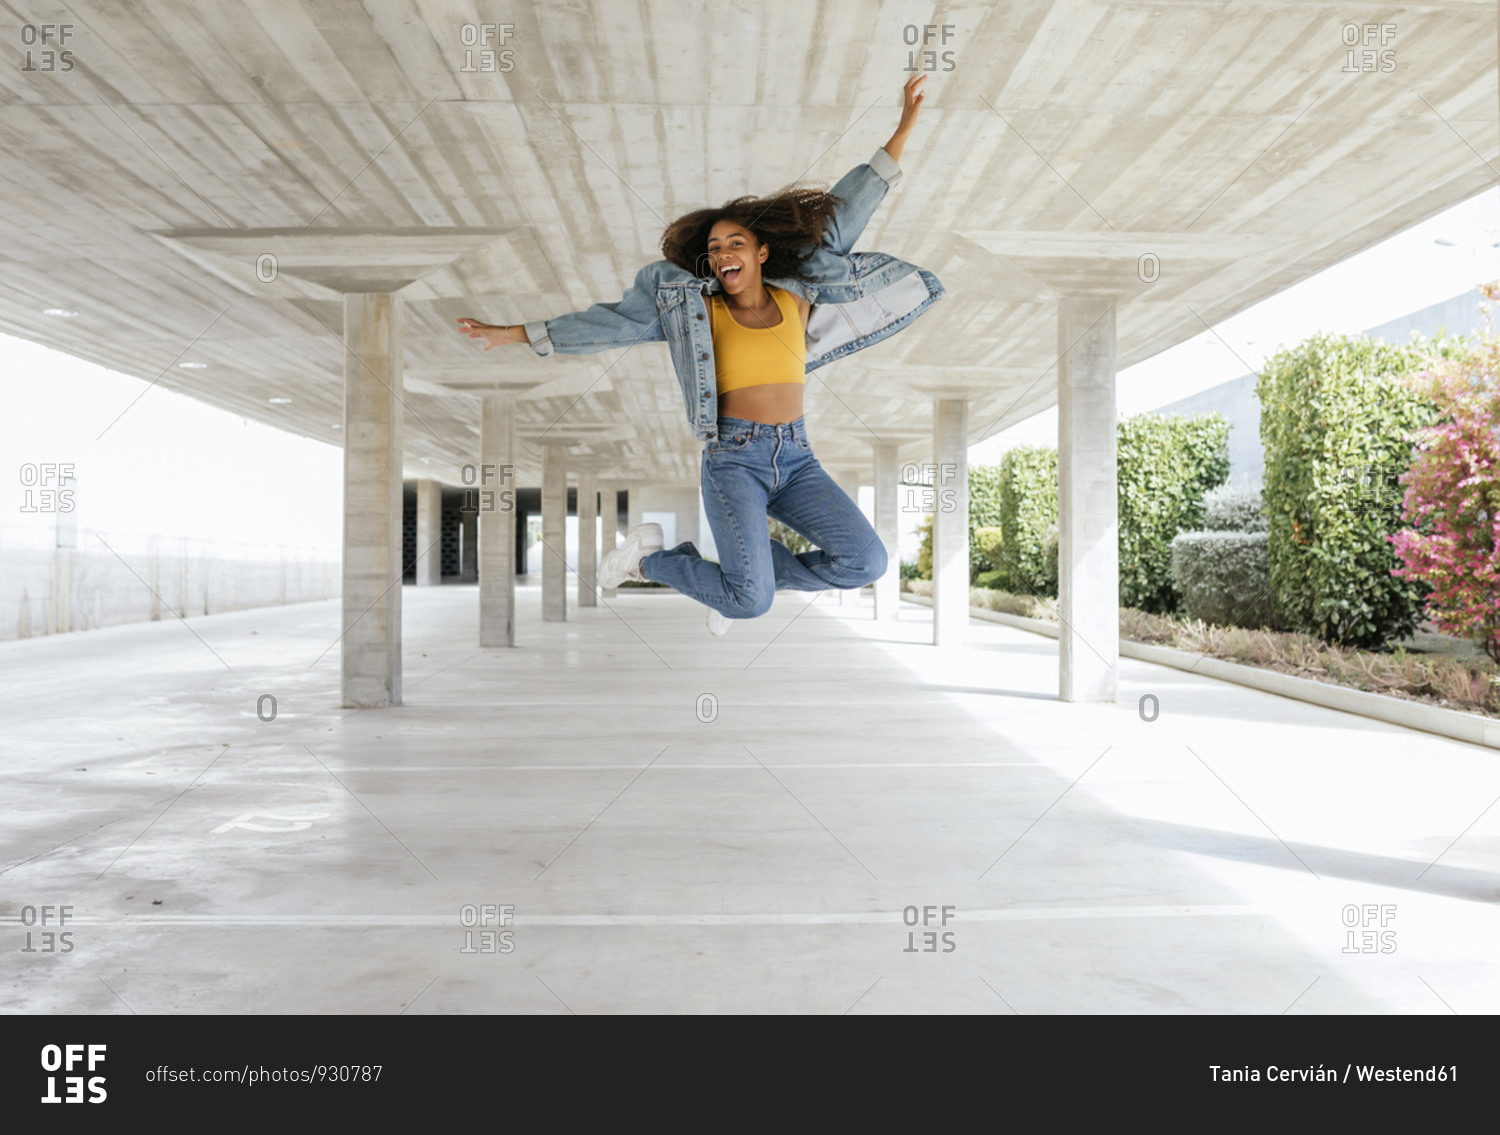 Smiling woman jumping in empty parking deck